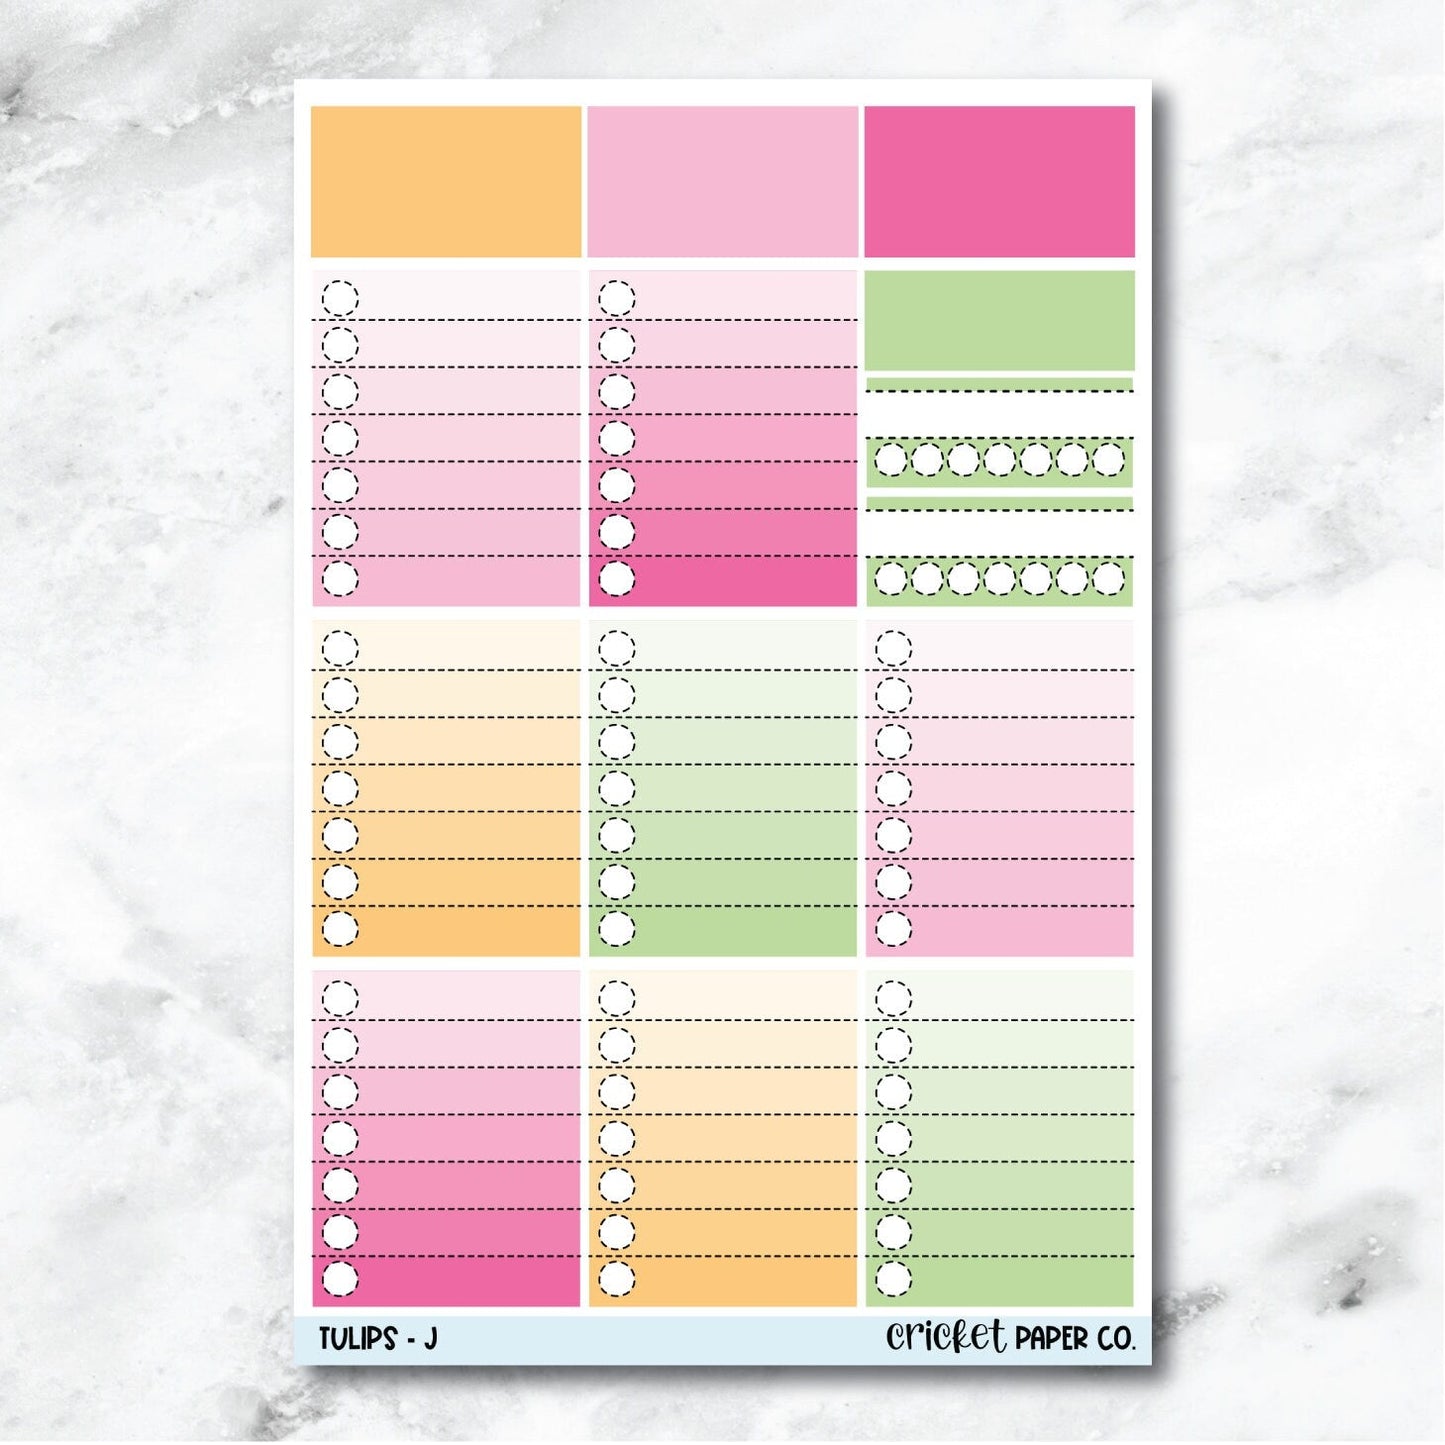 Tulips Full Box Checklists Journaling and Planner Stickers - J-Cricket Paper Co.